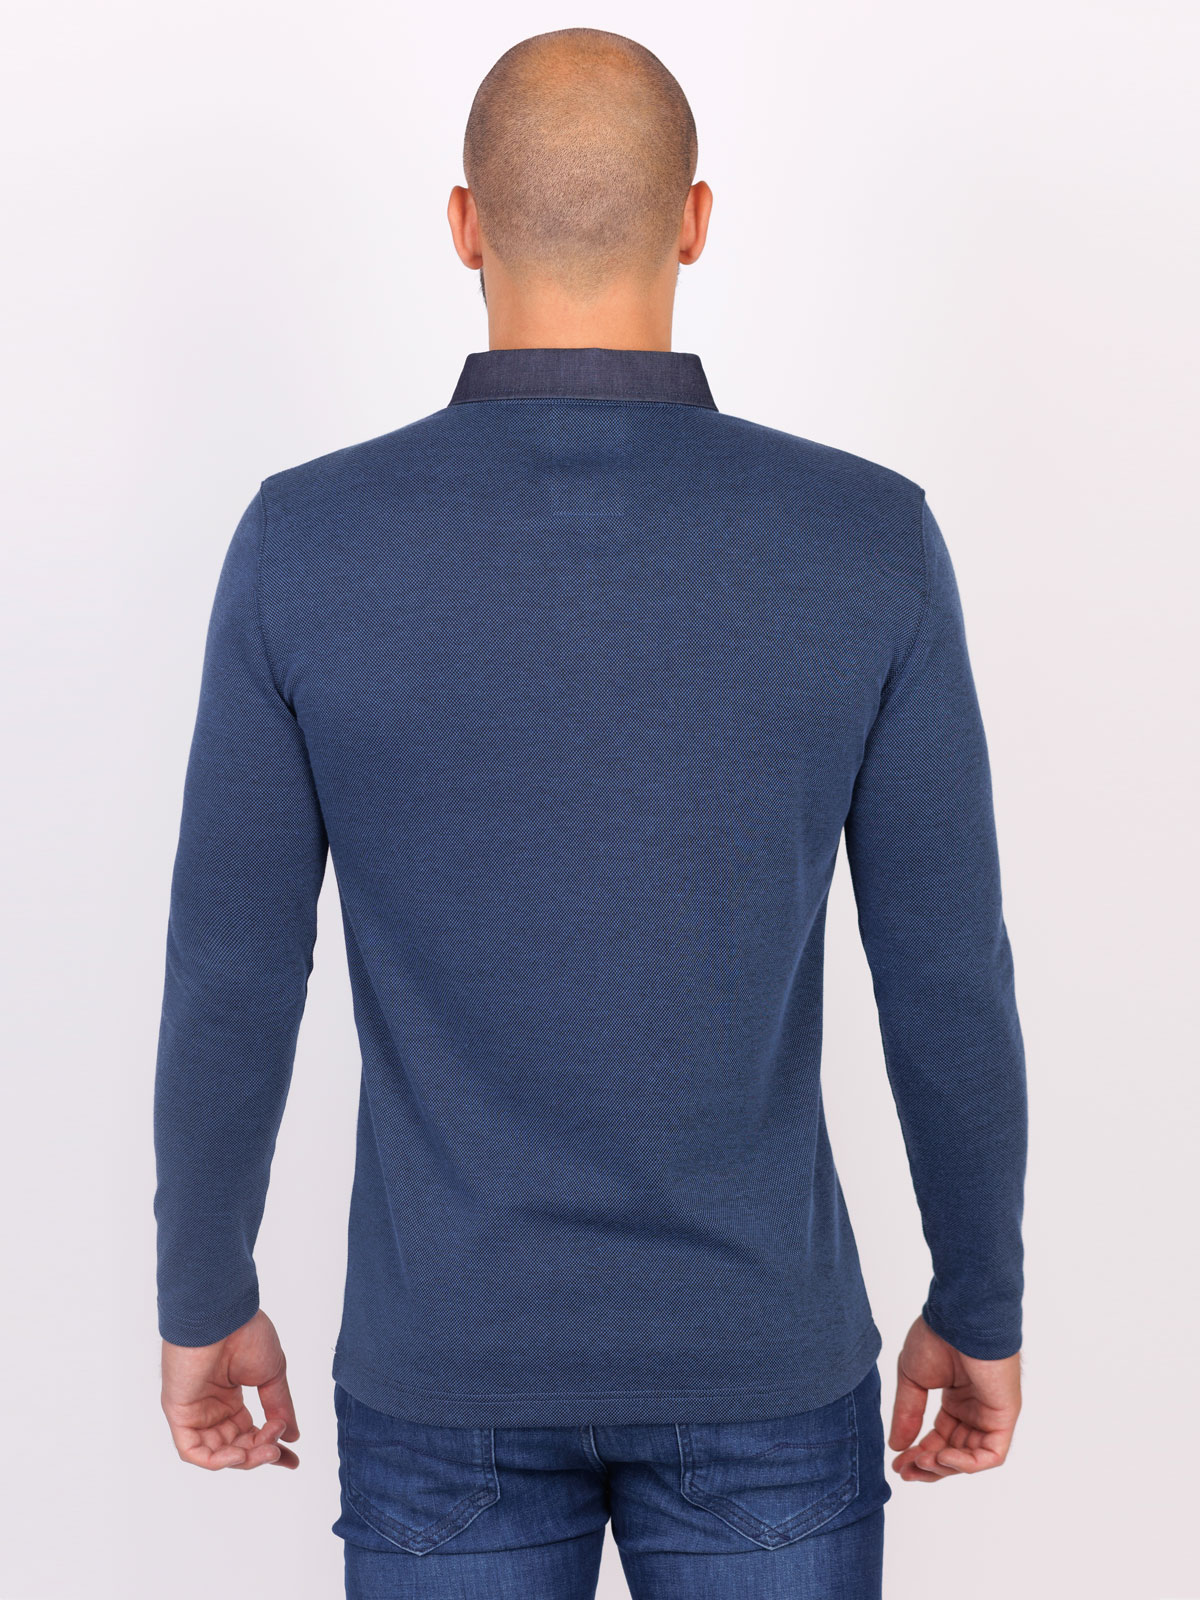 Mens denim blouse with stitched collar - 18274 € 35.43 img2